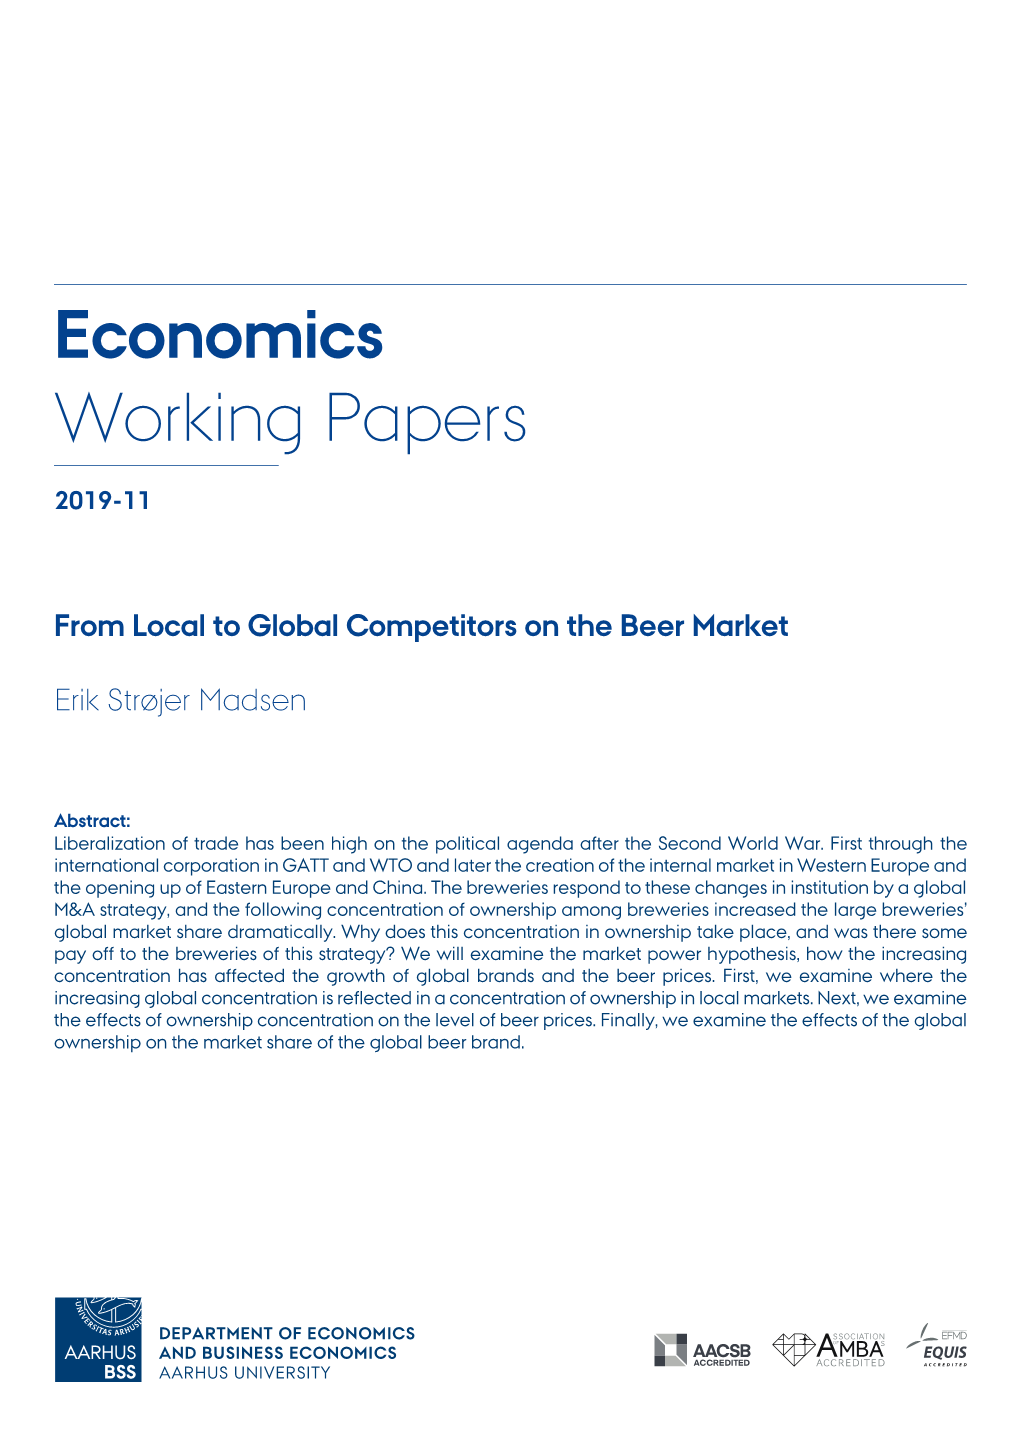 From Local to Global Competitors on the Beer Market Erik Strøjer Madsen